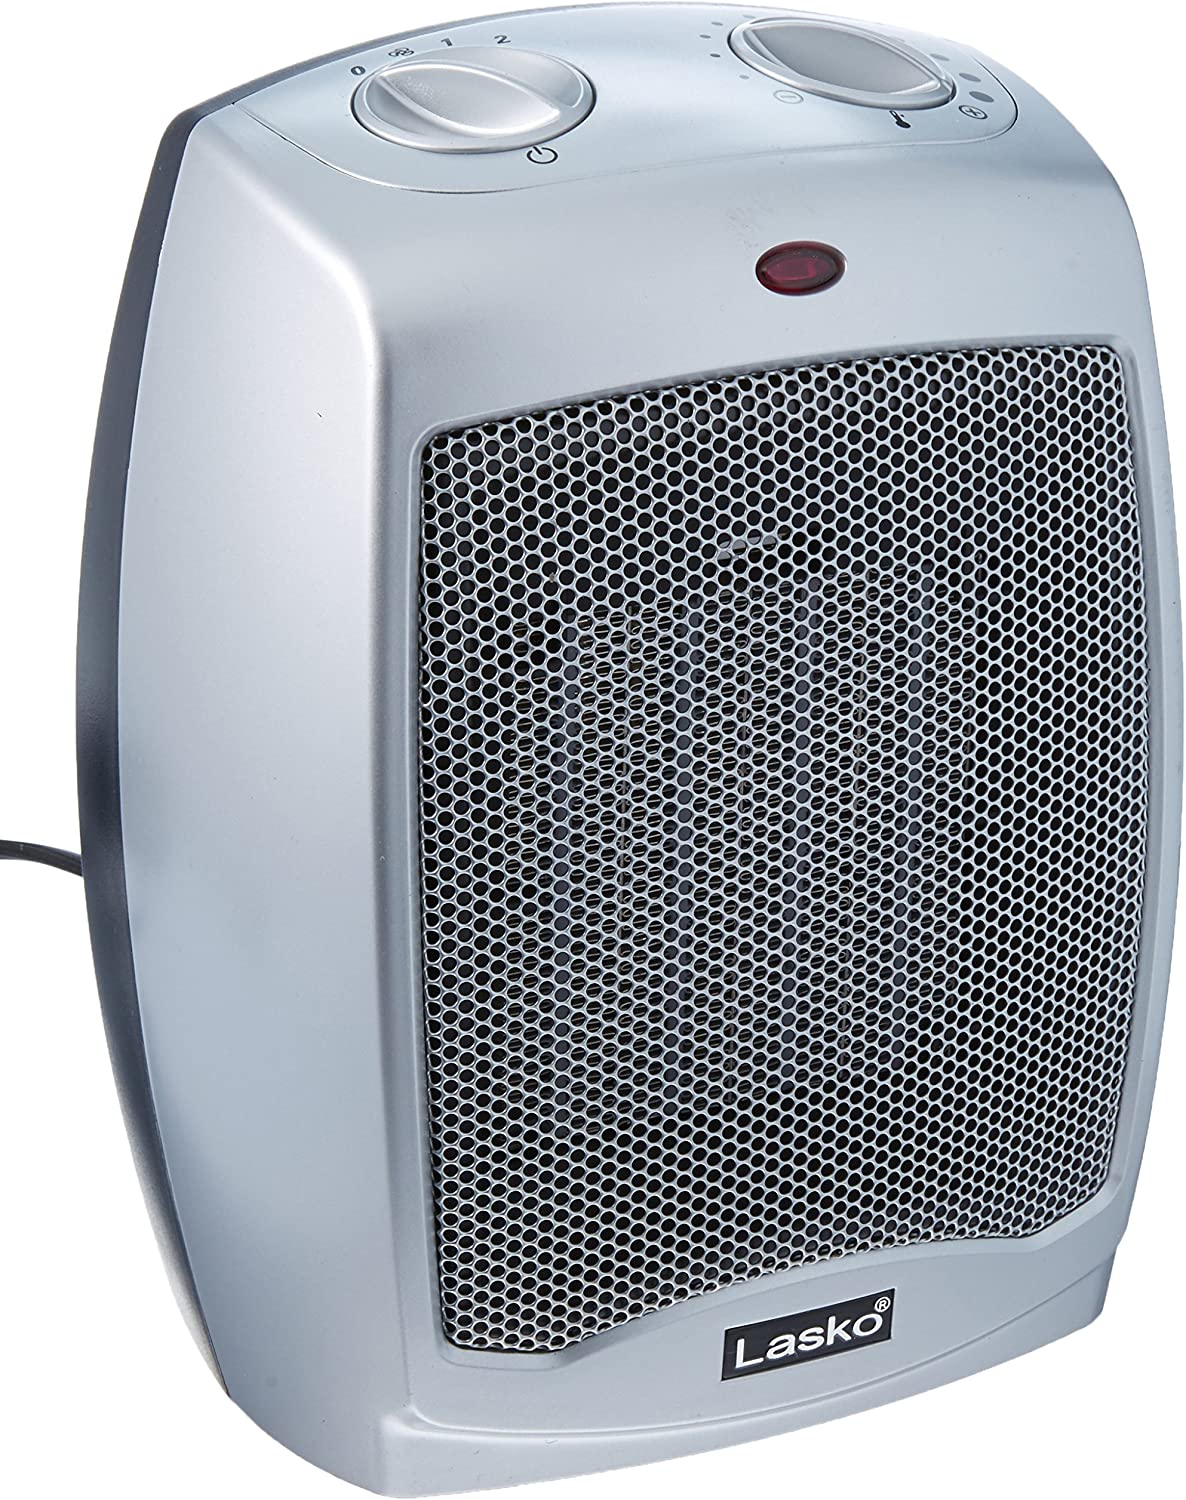 Lasko #754200 Ceramic Heater with Adjustable Thermostat Instruction and Operating Manual